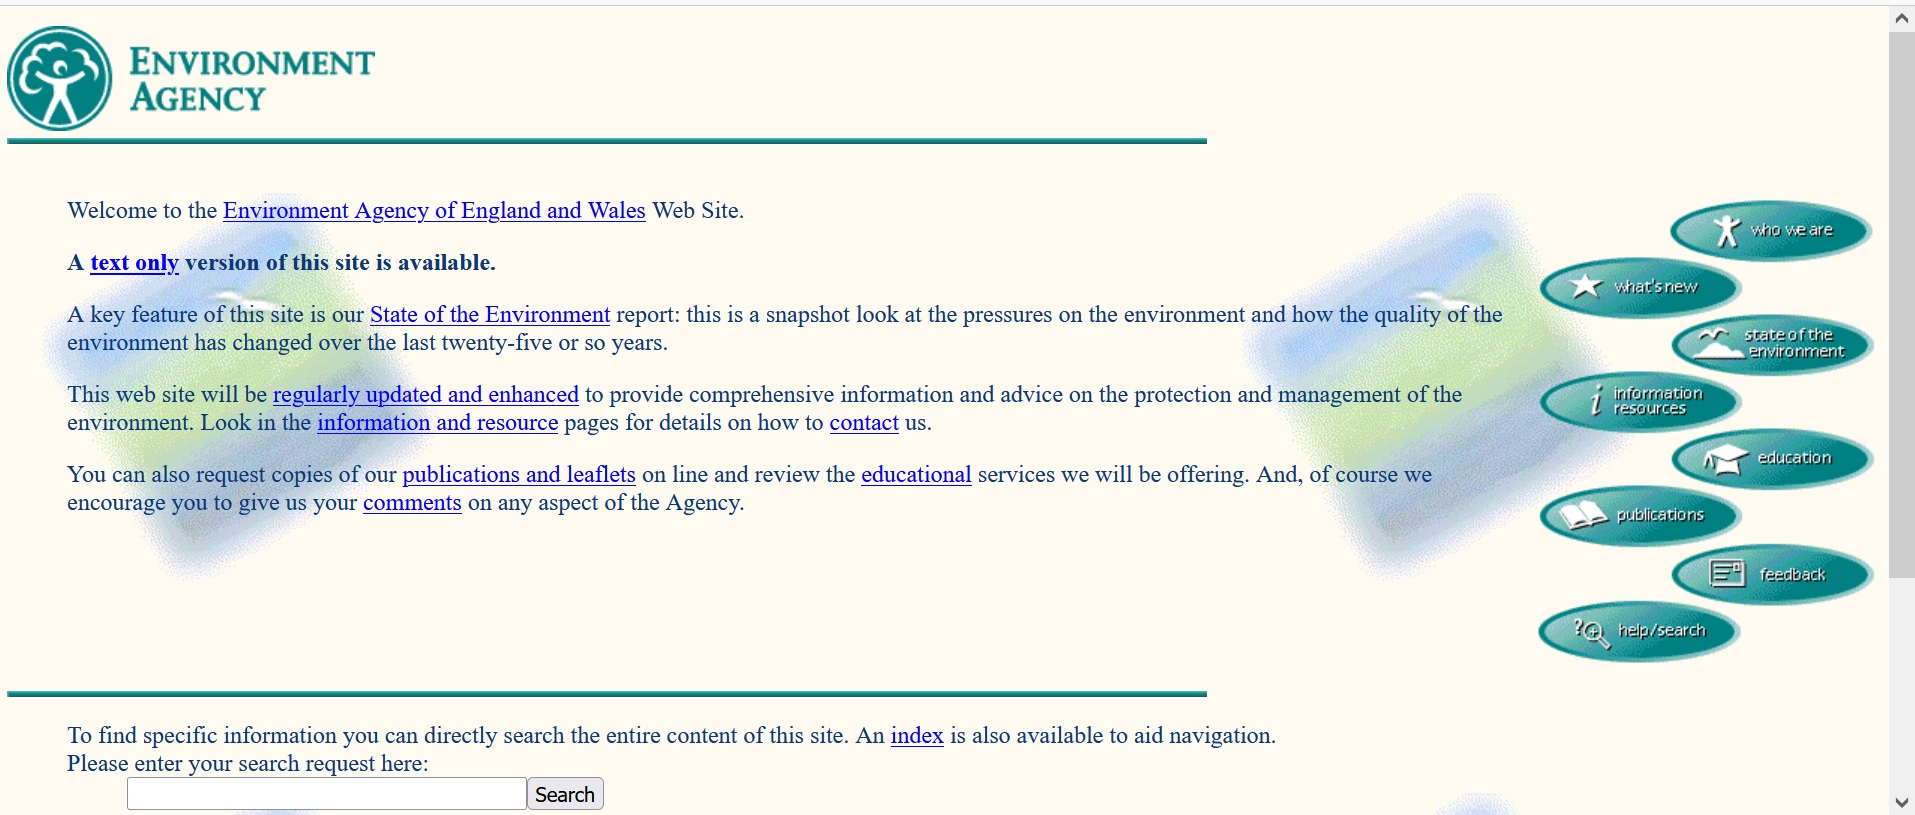 Archived version of The Environment Agency website captured 4 November 1996